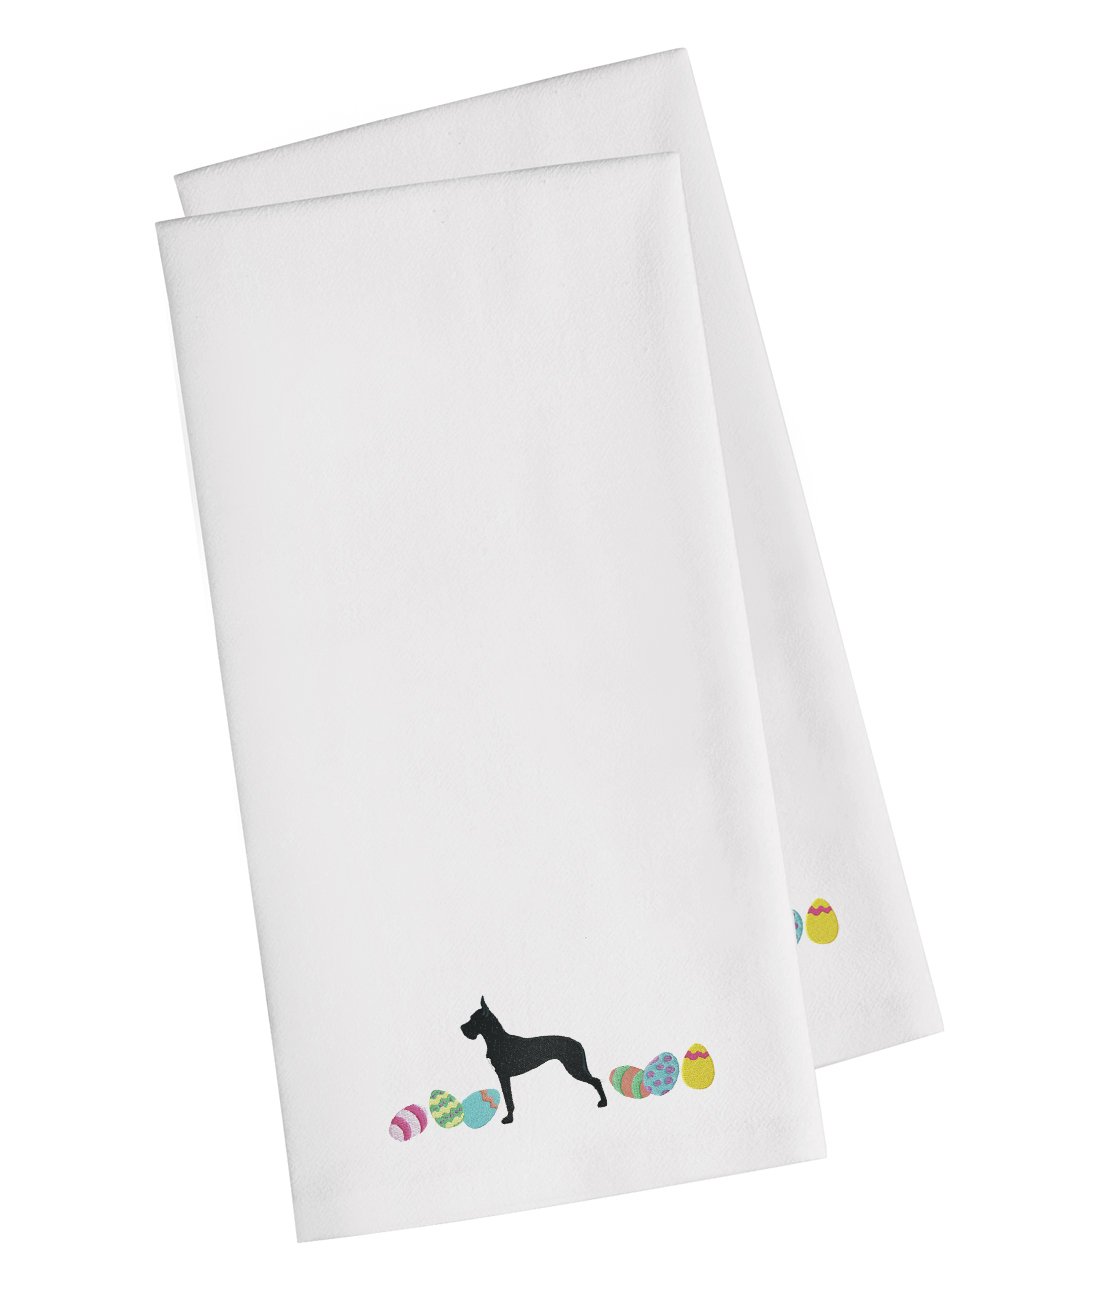 Great Dane Easter White Embroidered Kitchen Towel Set of 2 CK1649WHTWE by Caroline's Treasures